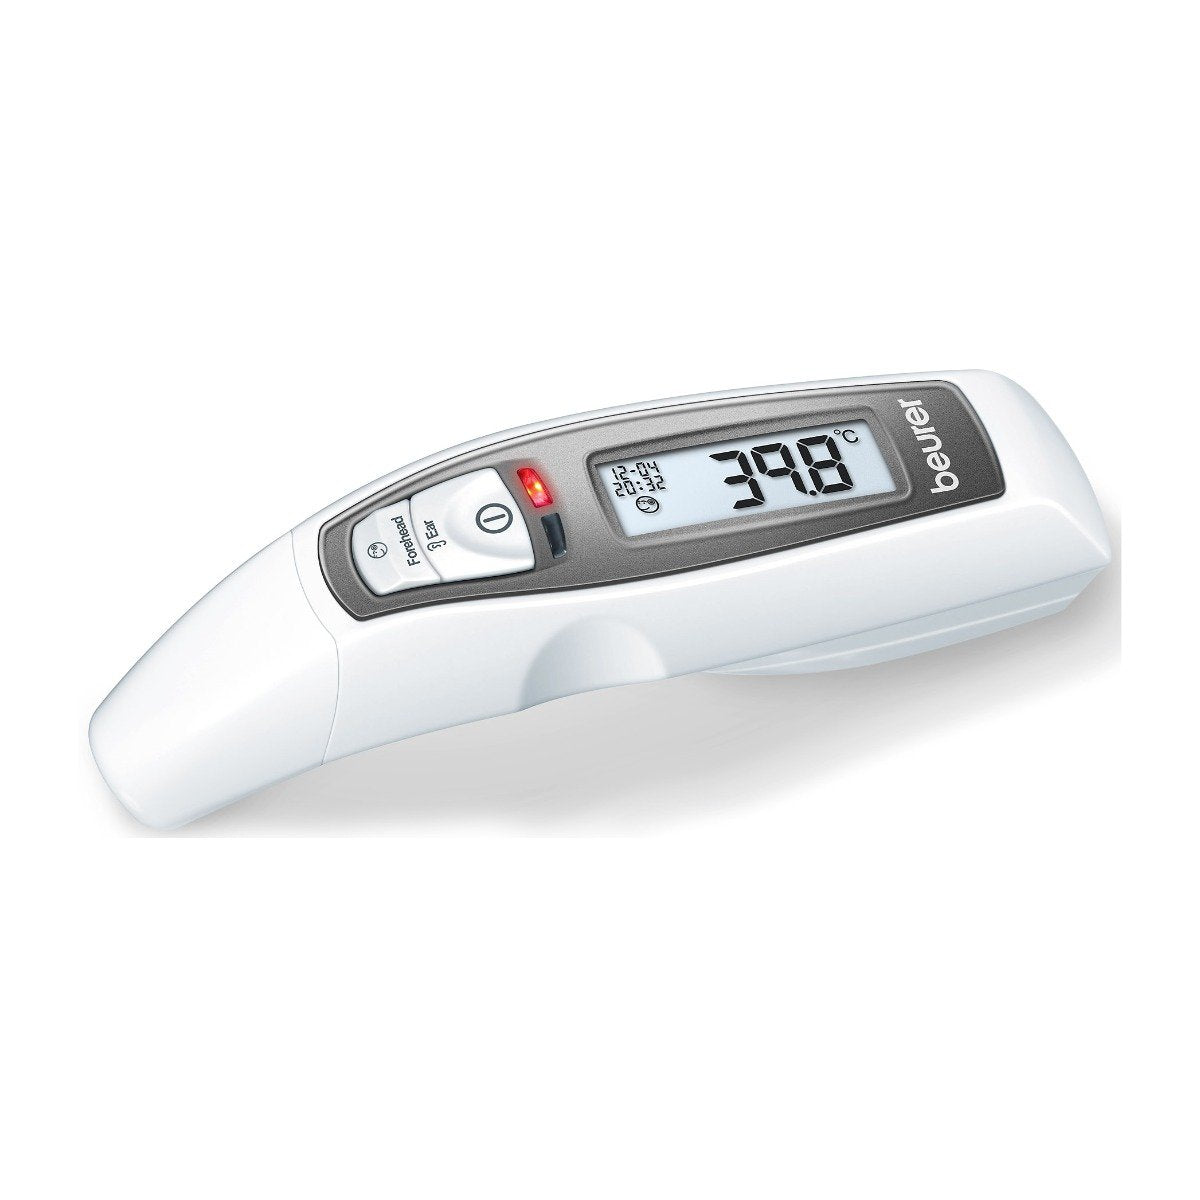 Beurer FT 65 Thermometer - Bloom Pharmacy